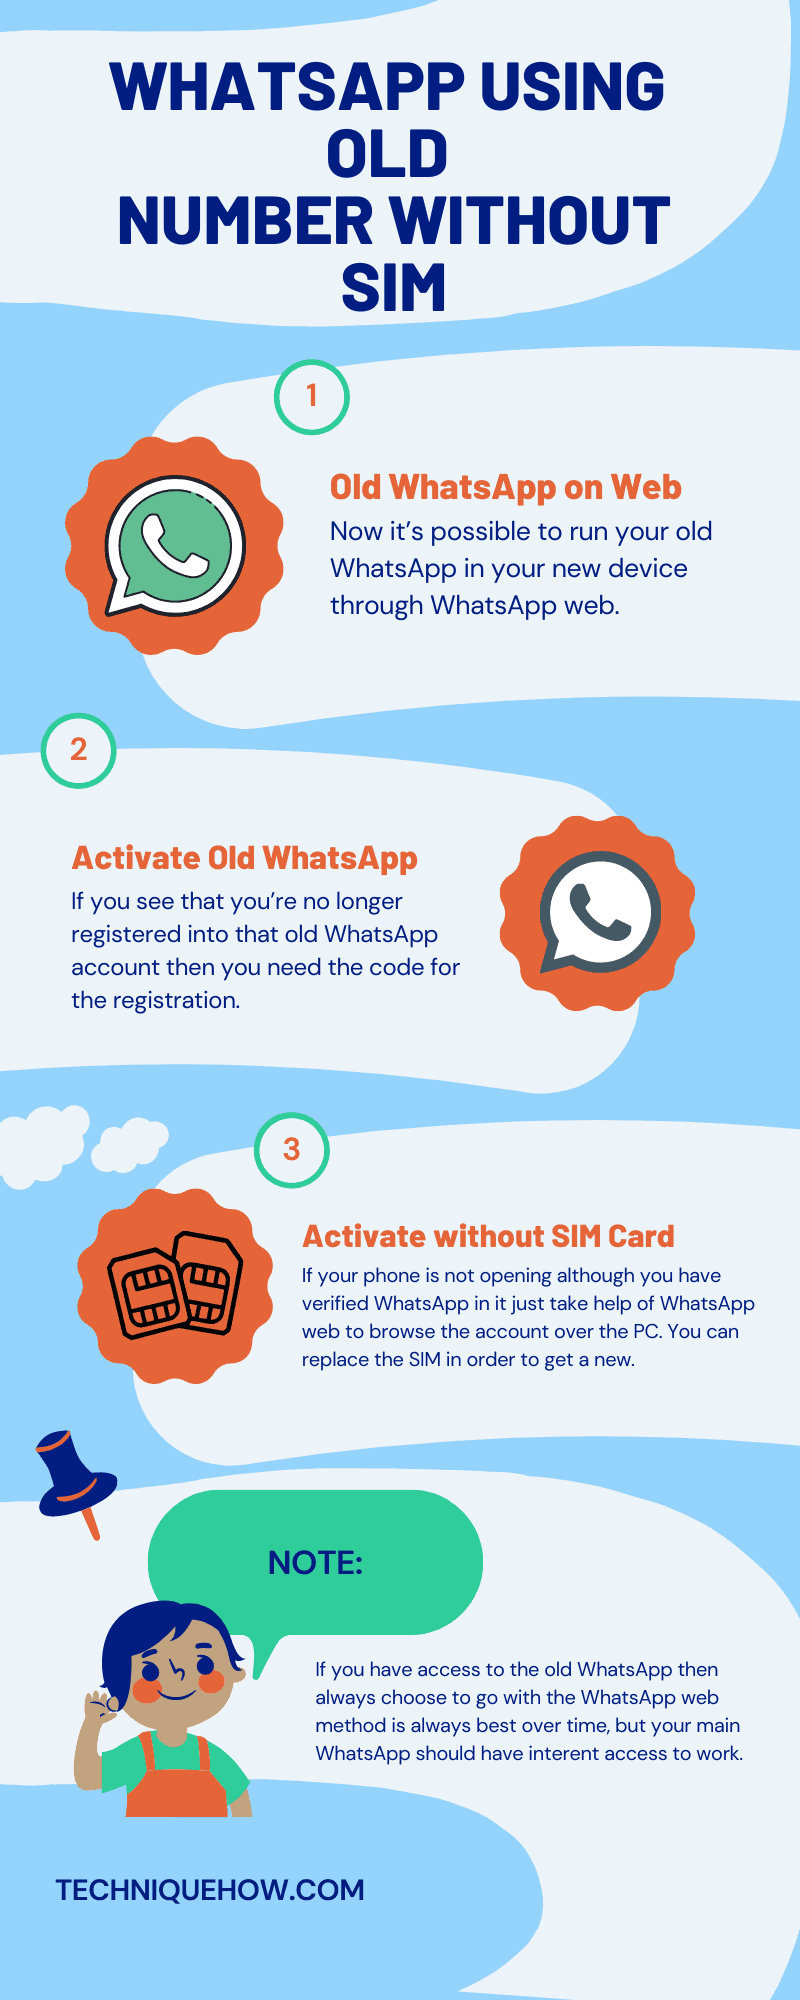 Infographic_WhatsApp using Old number without SIM